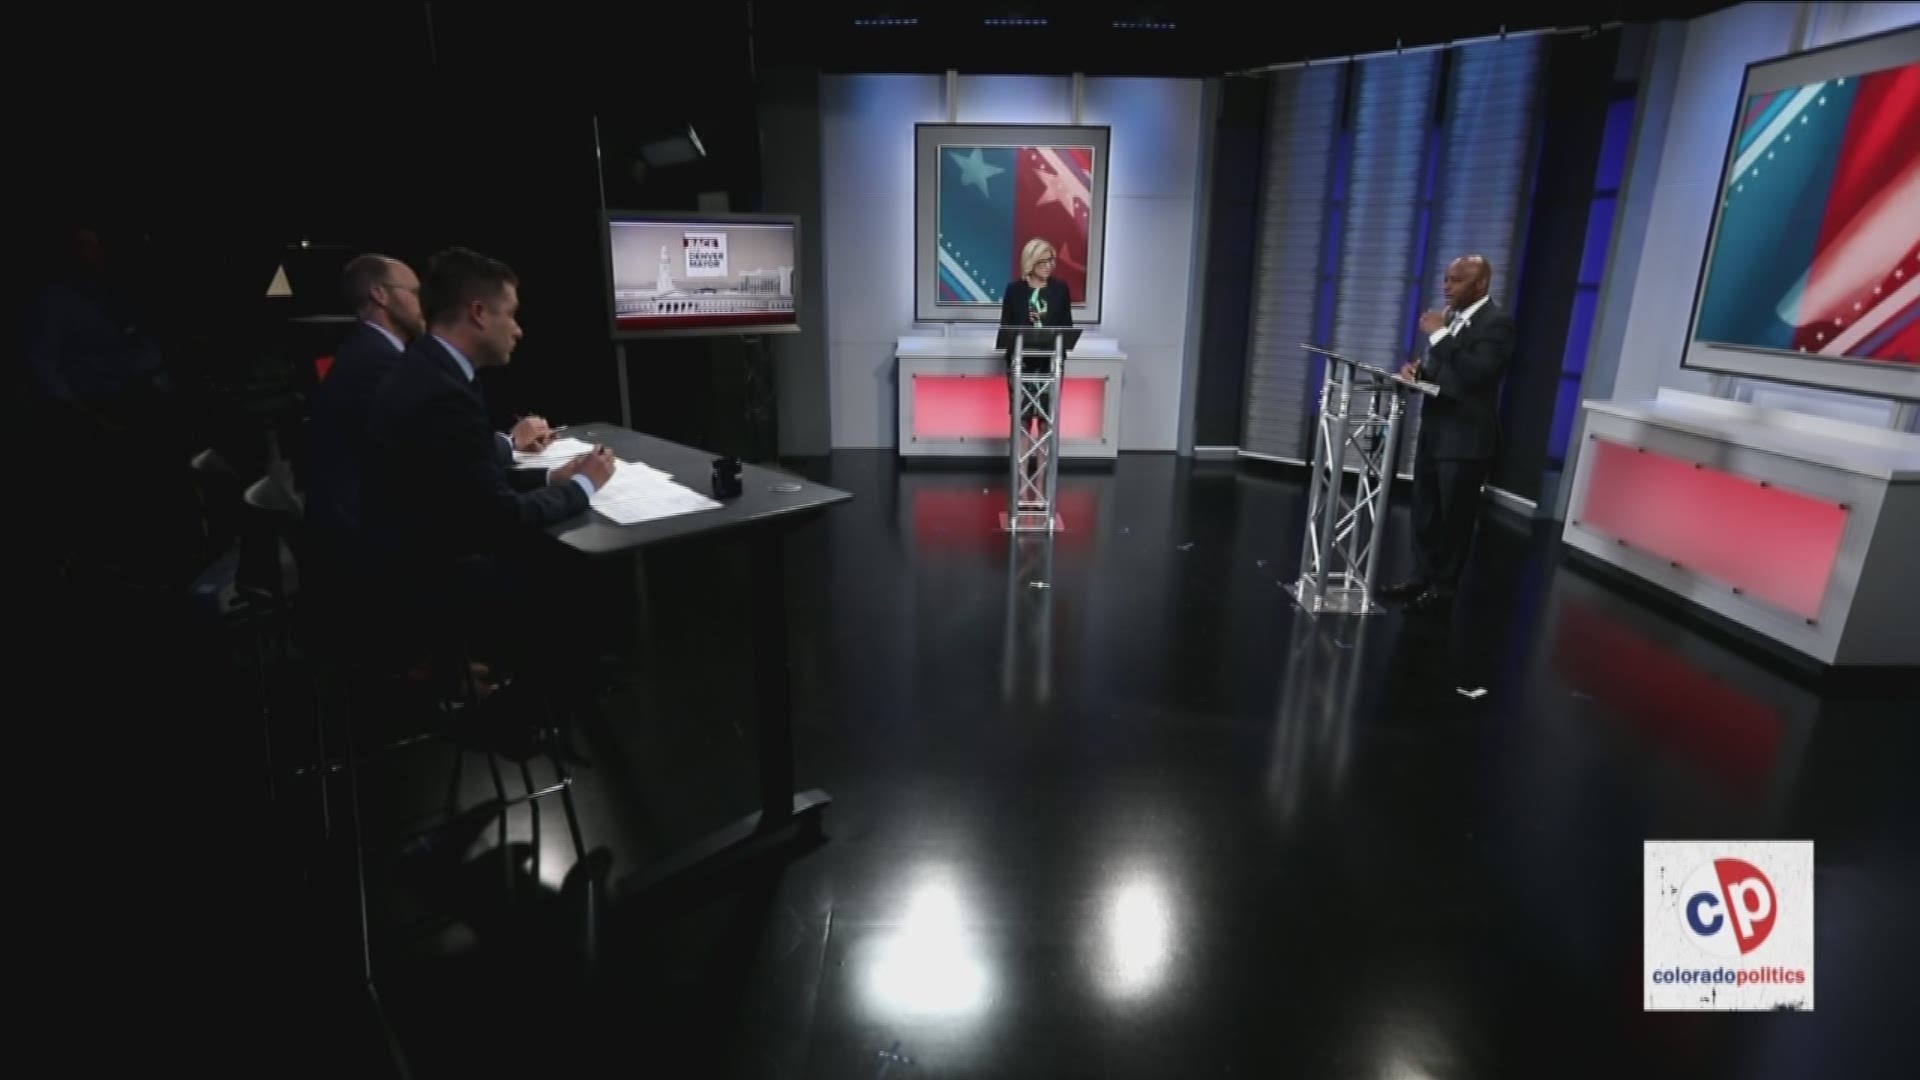 Denver mayoral candidates Michael Hancock and Jamie Giellis discuss the "brown cloud" being back in the city and "legacy projects" during a 9NEWS mayoral debate ahead of the June 4 runoff election.